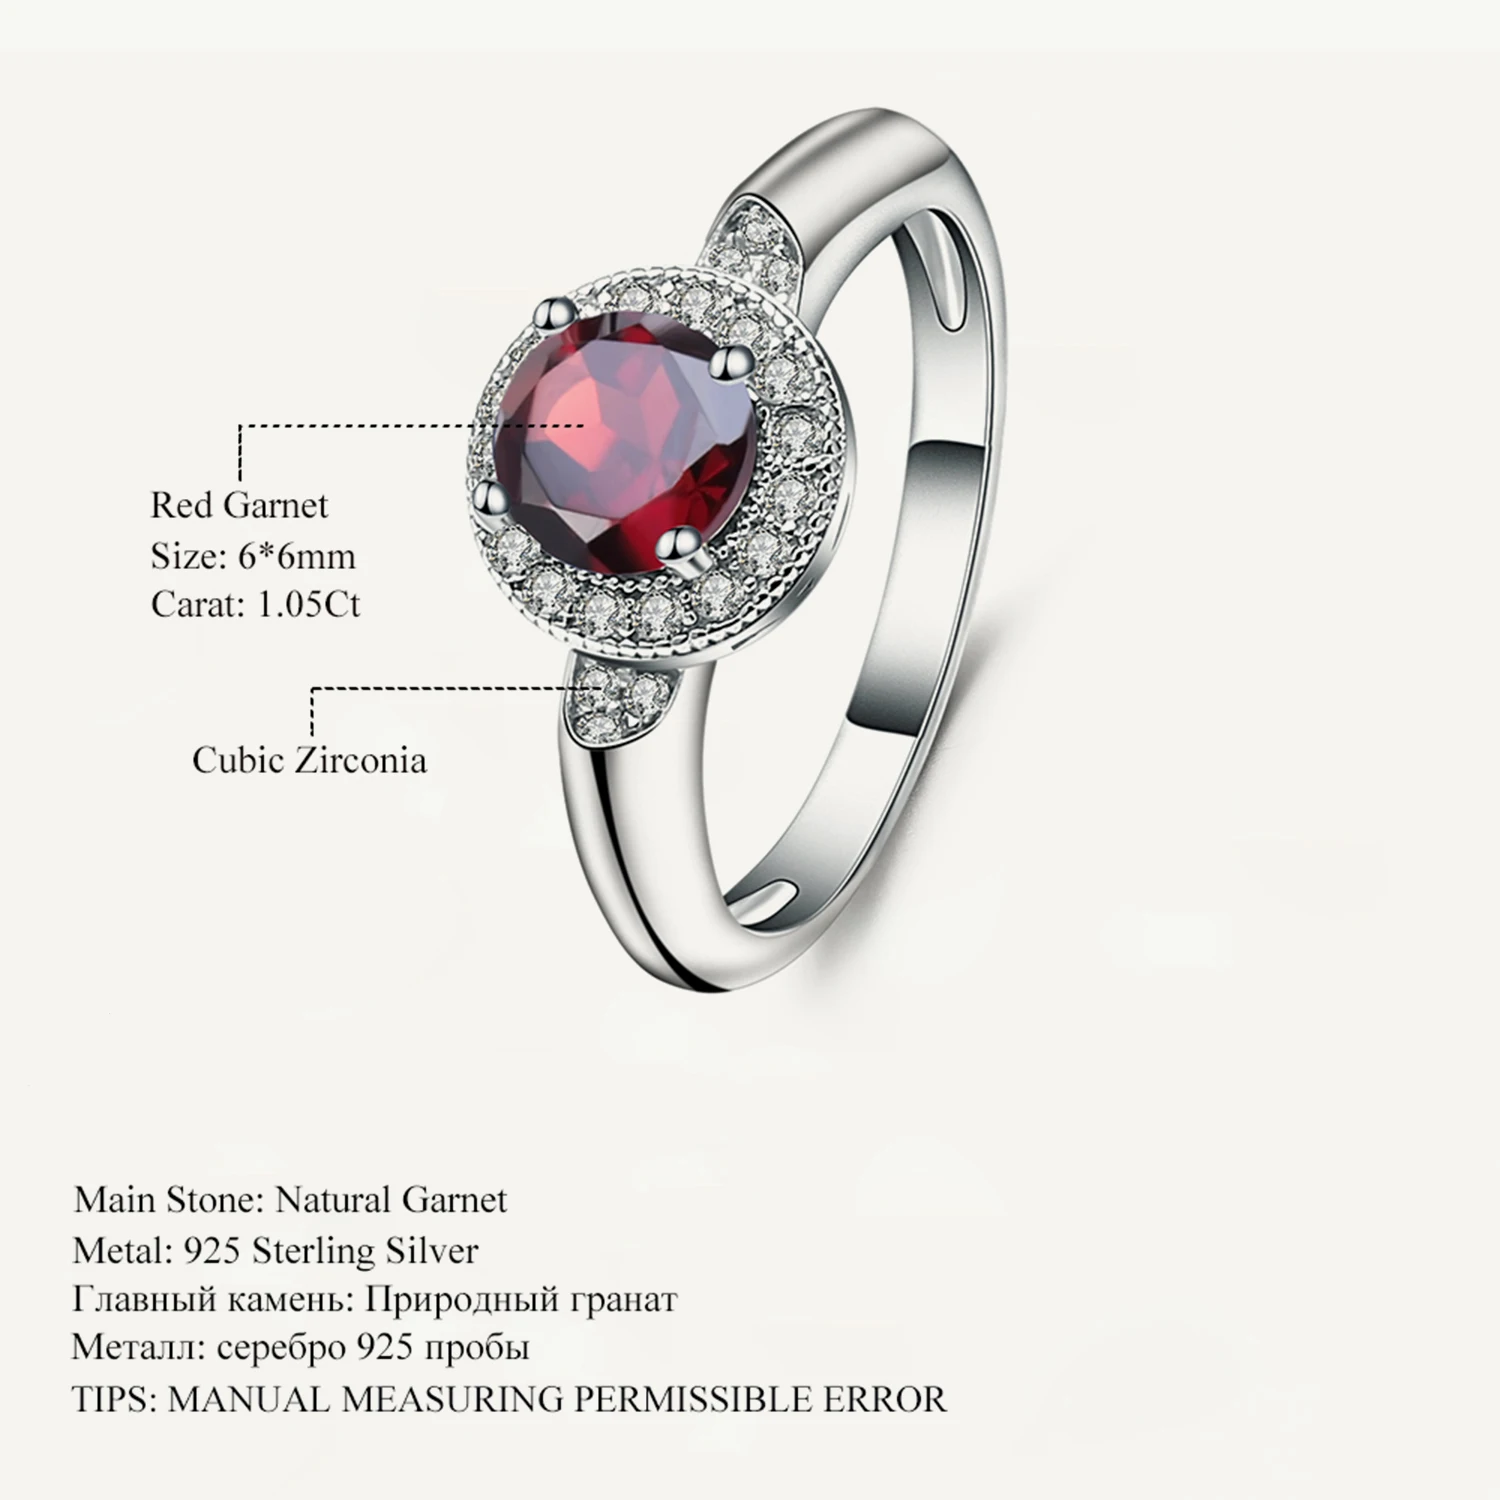 

GEM'S BALLET Real 925 Sterling Silver Classic Wedding Rings 1.05Ct Round Natural Red Garnet Gemstone Ring for Women Fine Jewelry